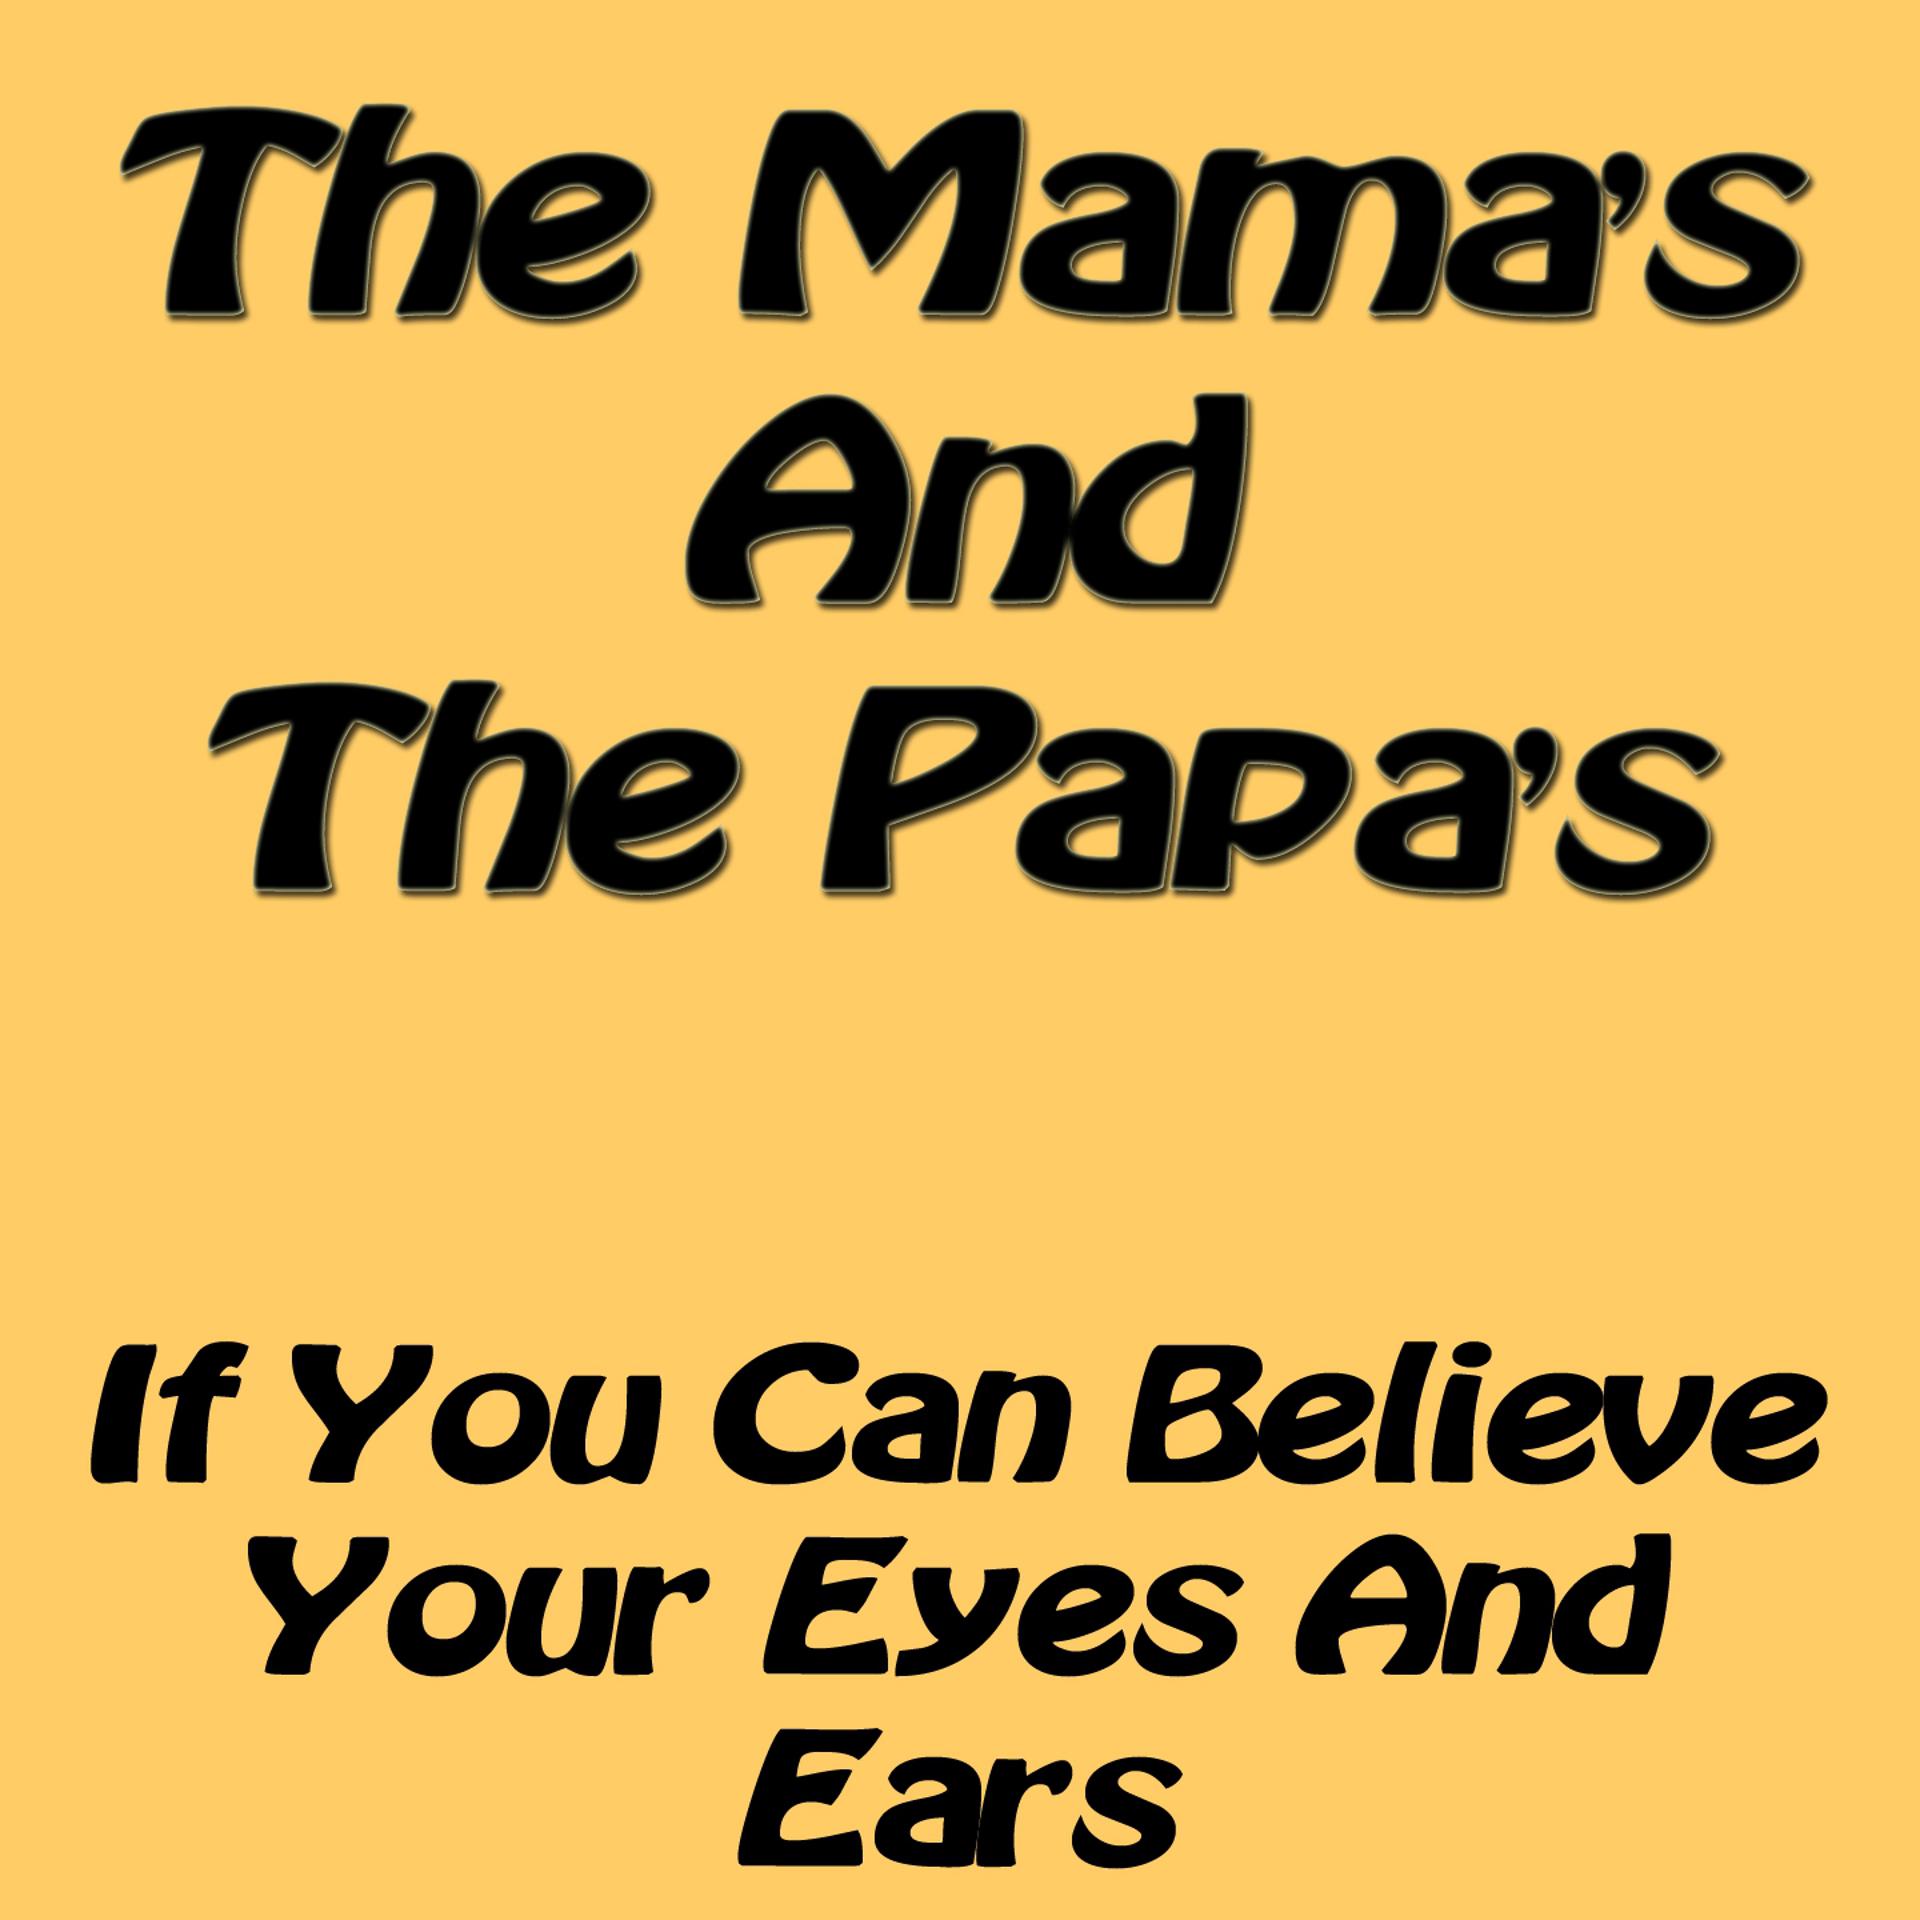 Can you believe this. If you can believe your Eyes and Ears the mamas the Papas. The mamas the Papas album if you can believe your Eyes. Can believe. The mamas and Papas if you can believe your Eyes and Ears обложка.